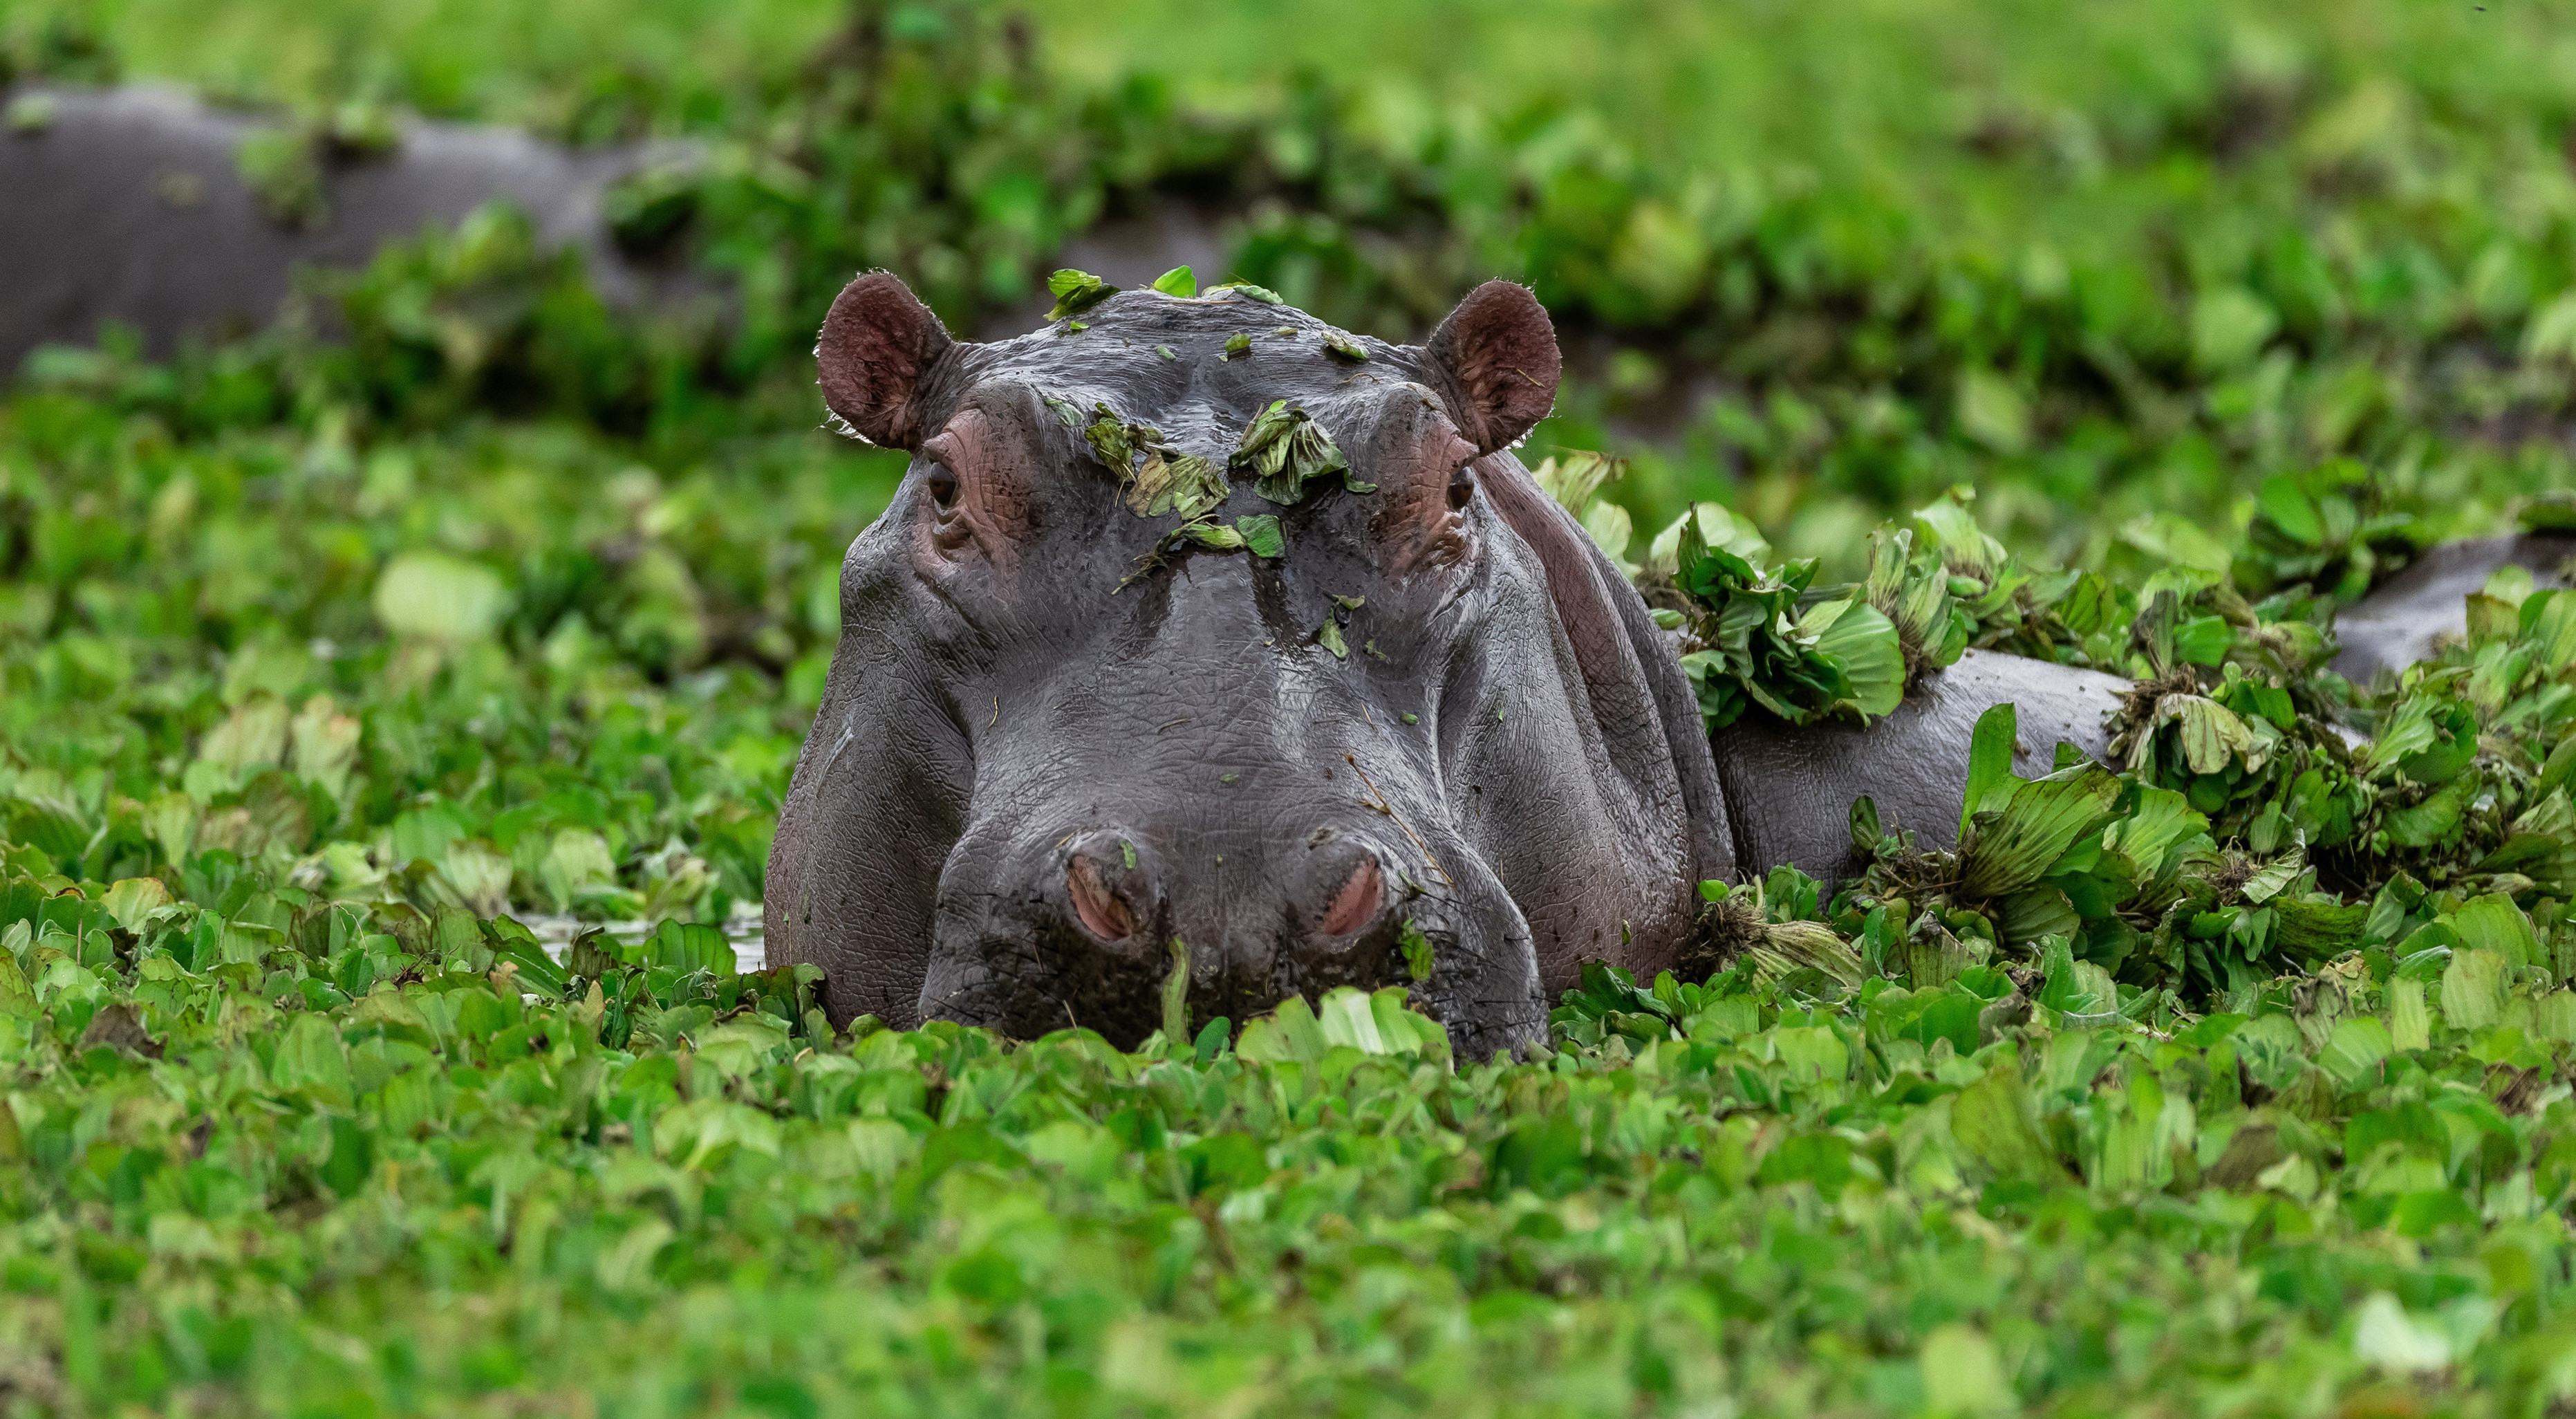 Hippos can be very dangerous, so it’s best not to go near them! Photo: Shutterstock